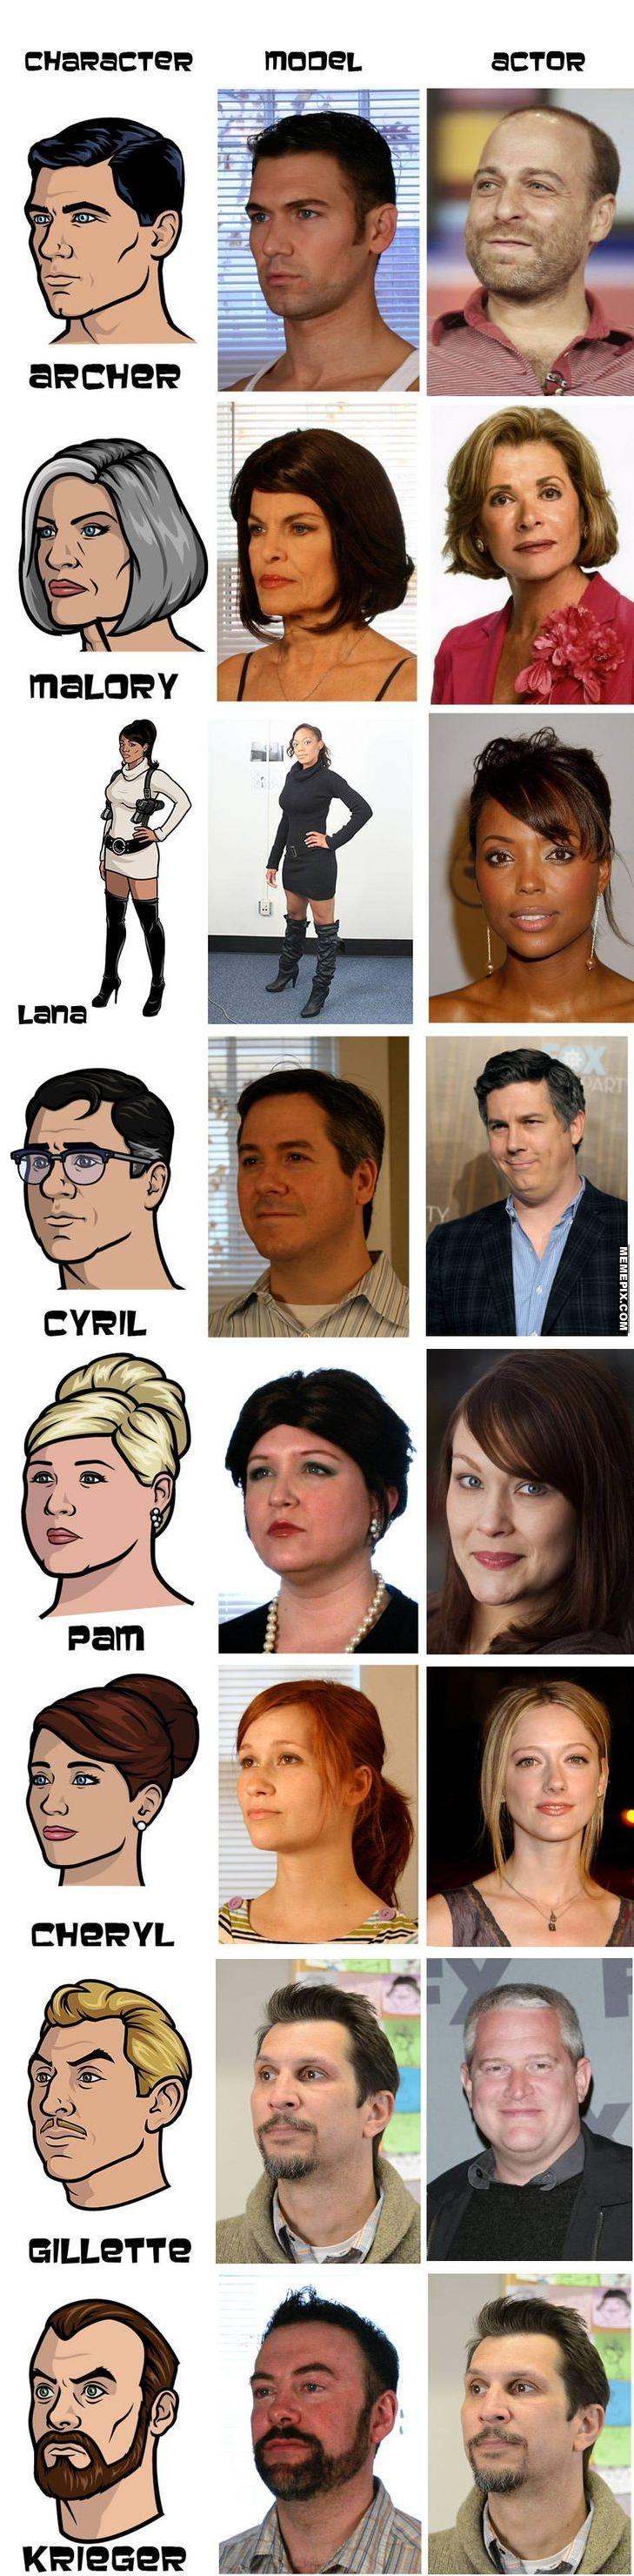 The Models and Voice Actors for the Archer Characters